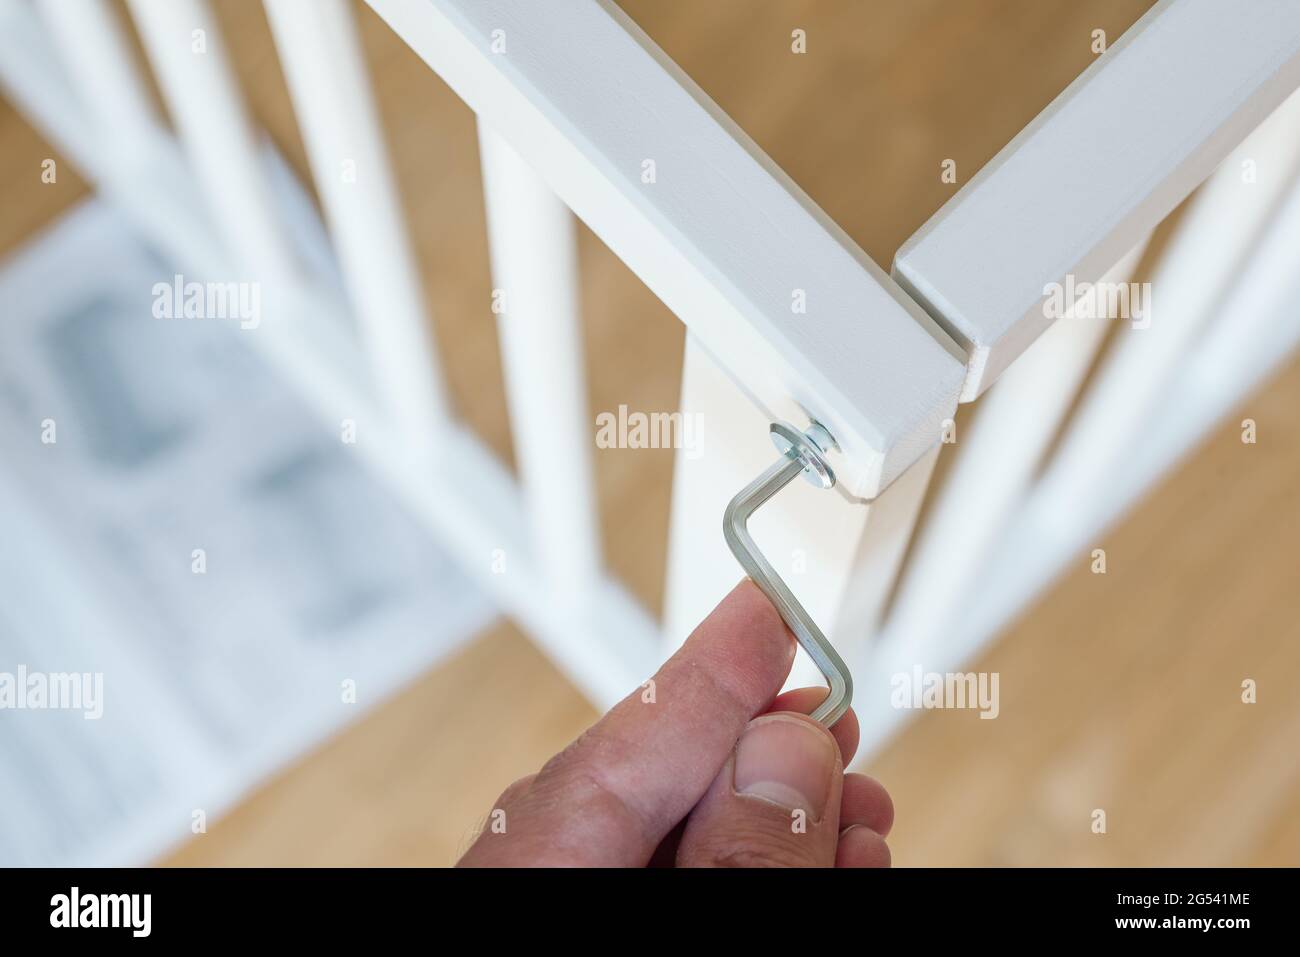 close-up of person assembling furniture using a hex wrench Stock Photo